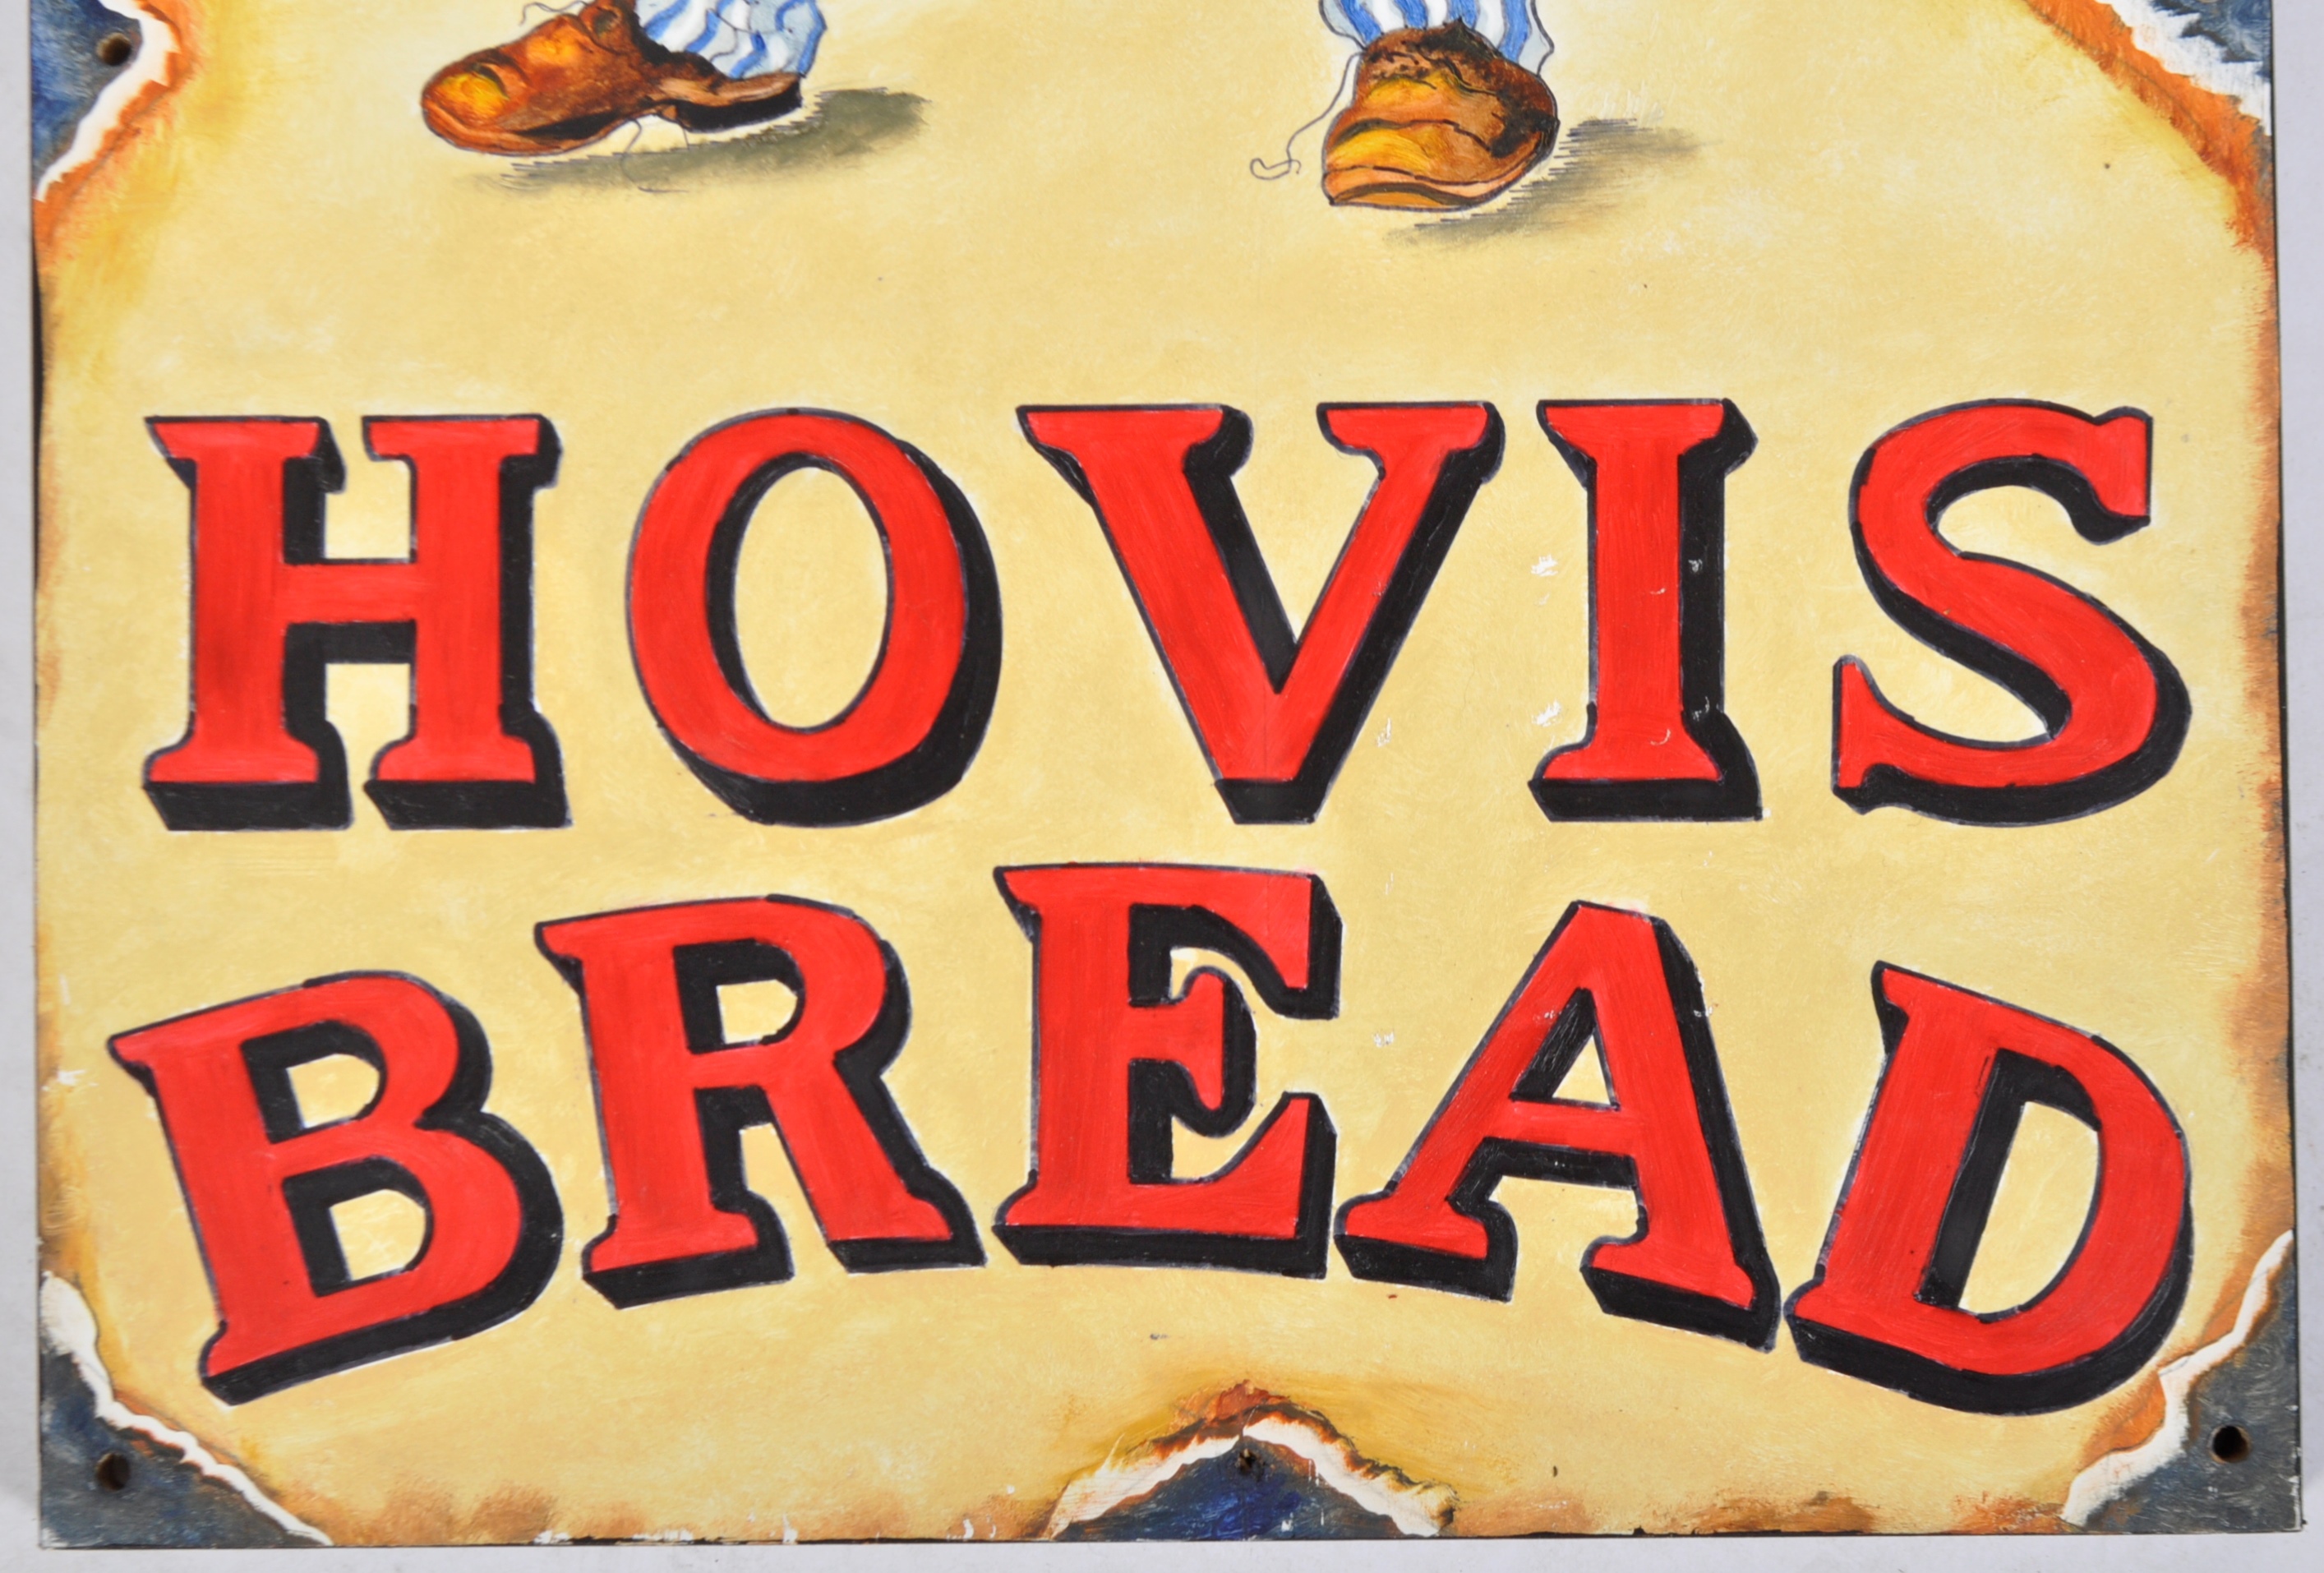 HOVIS BREAD - OIL ON BOARD ADVERTISING SIGN - Image 3 of 5